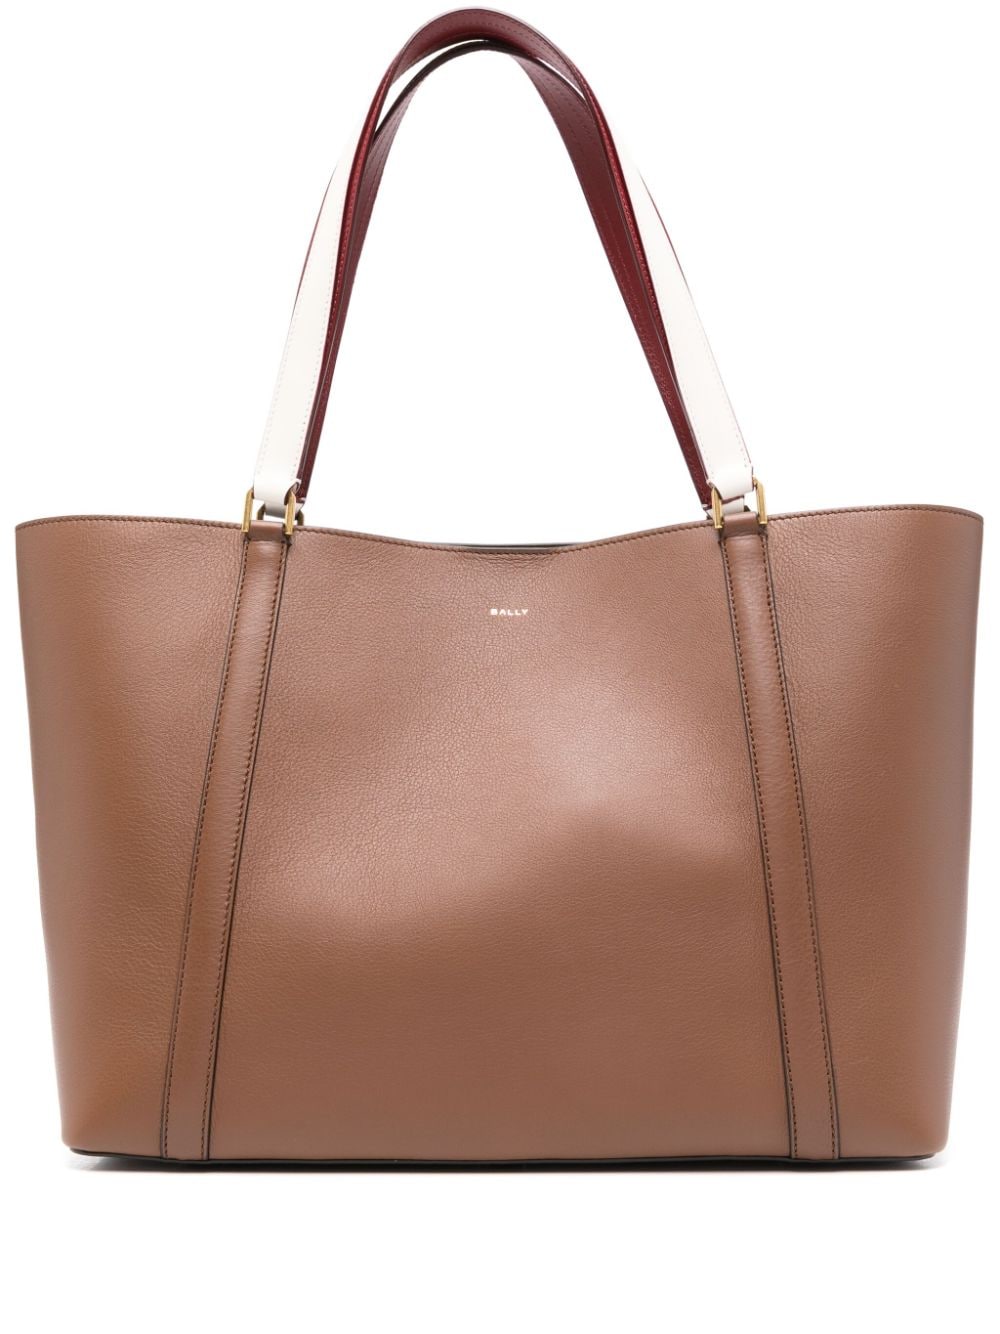 large Code leather tote bag